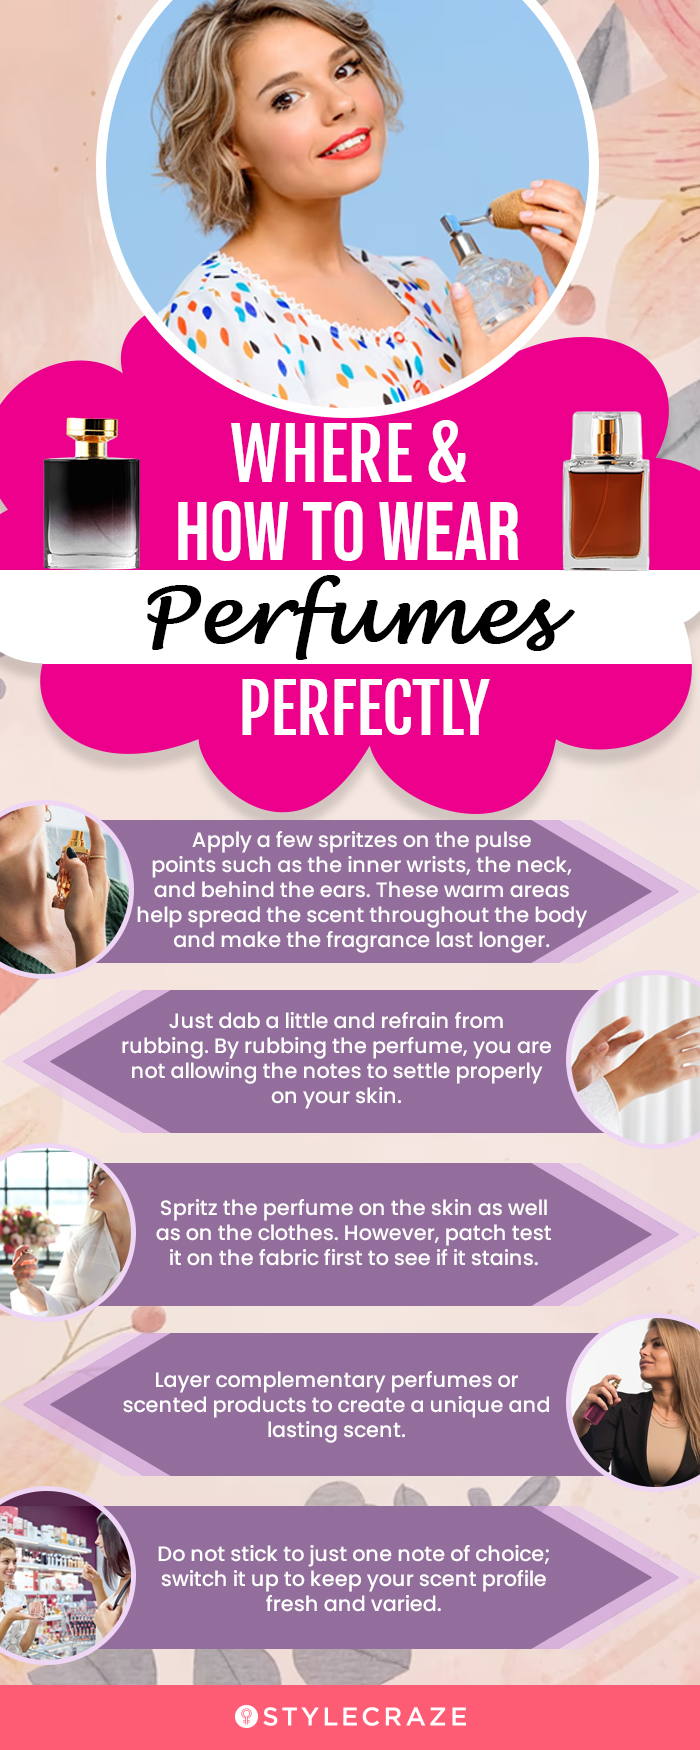 Where & How To Wear Perfumes Perfectly (infographic)